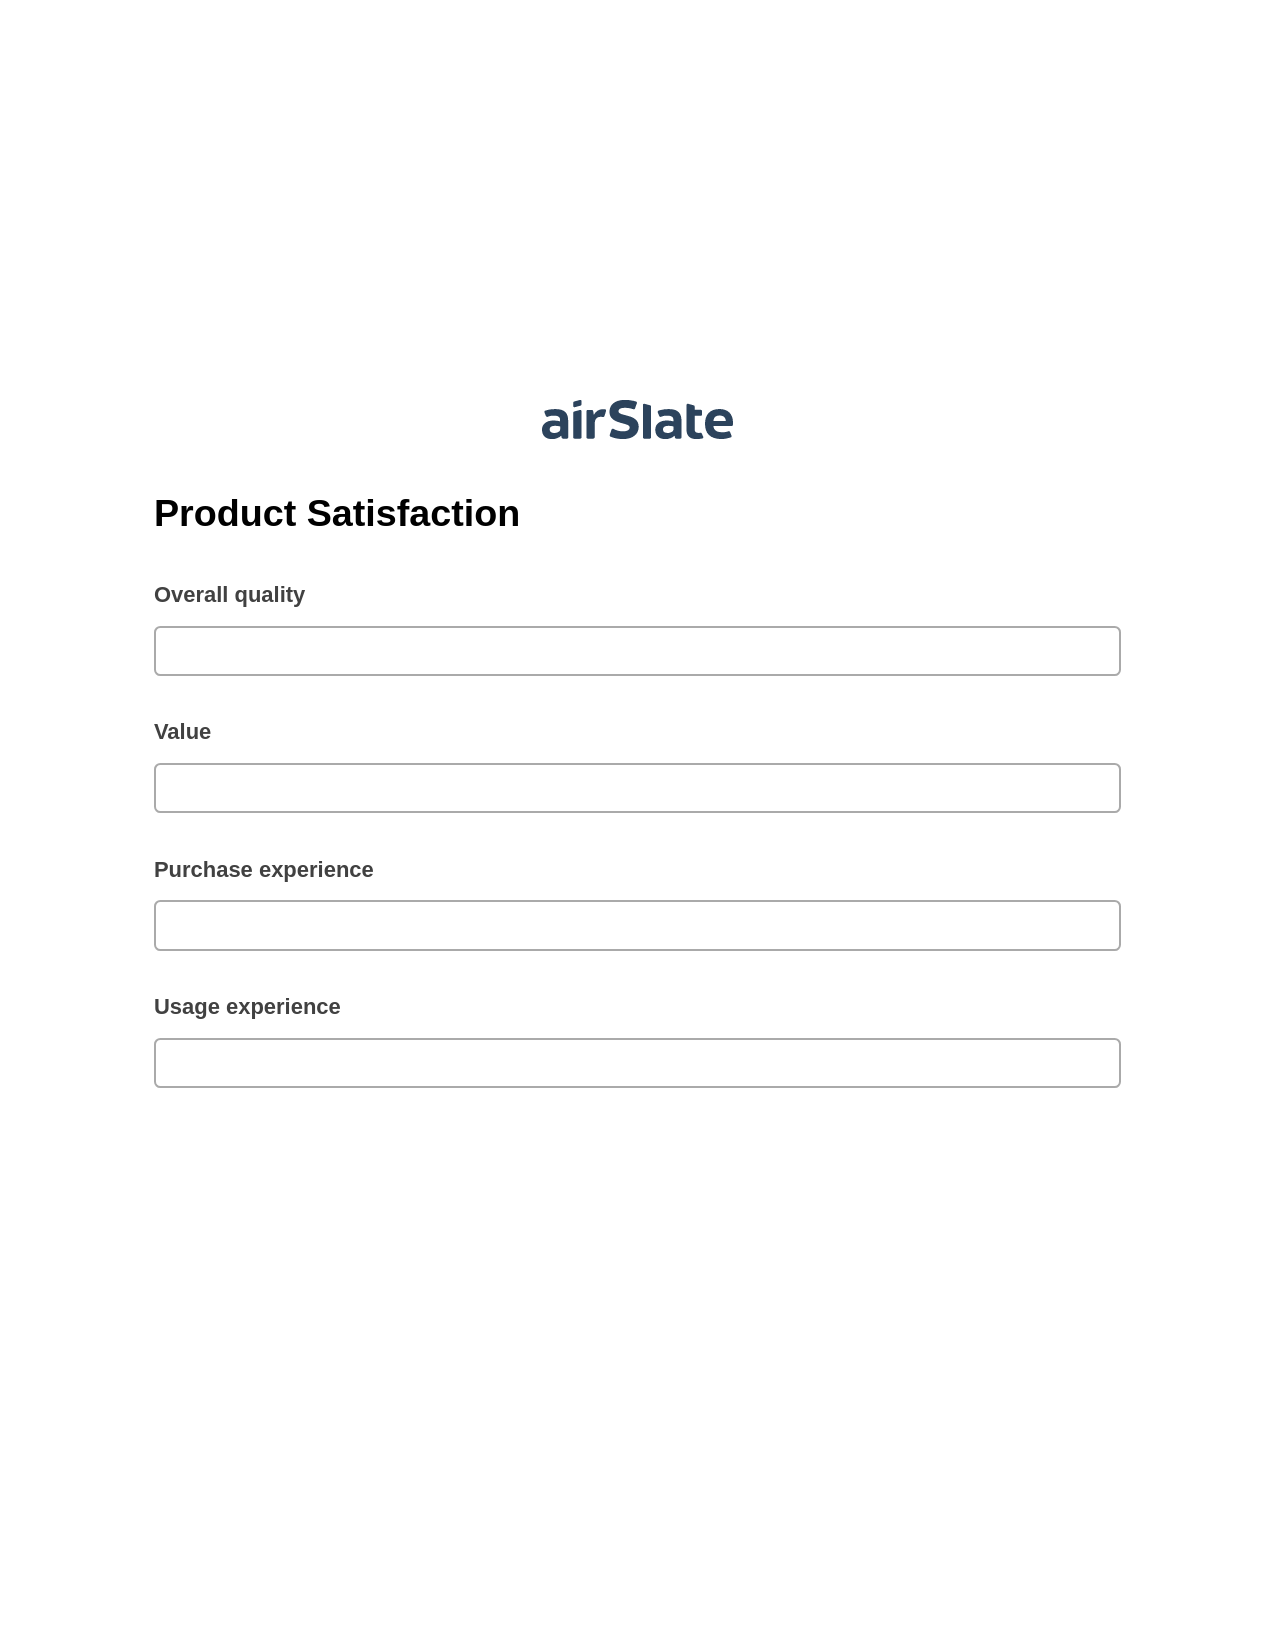 Product Satisfaction Pre-fill from another Slate Bot, Google Calendar Bot, Box Bot